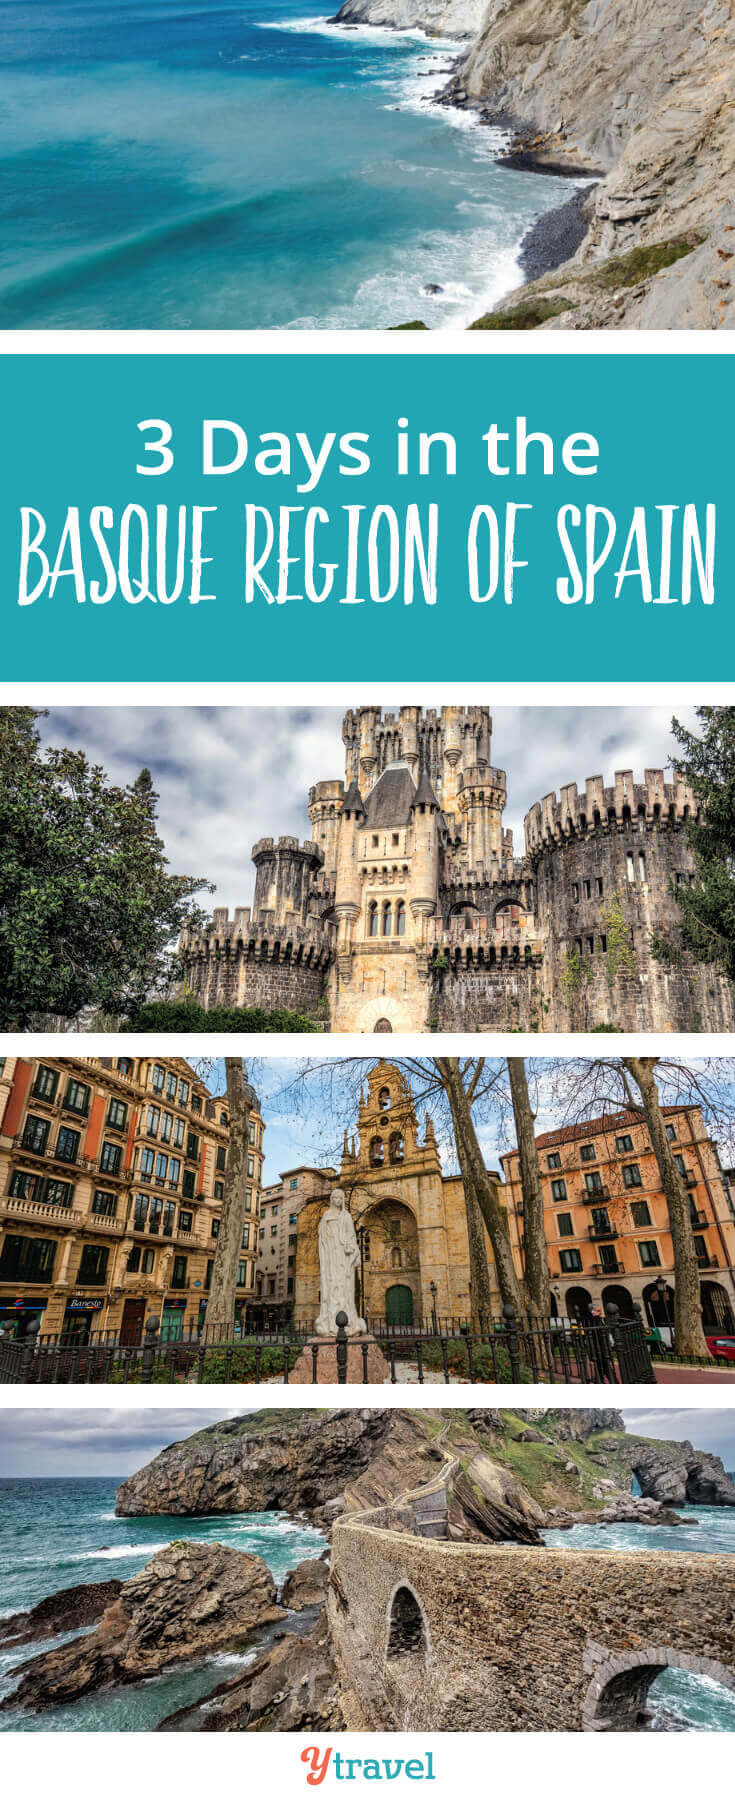 Thinking about a trip to the Basque region of Spain. Check out this 3 day itinerary. #Spain #BasqueCountry #Europe